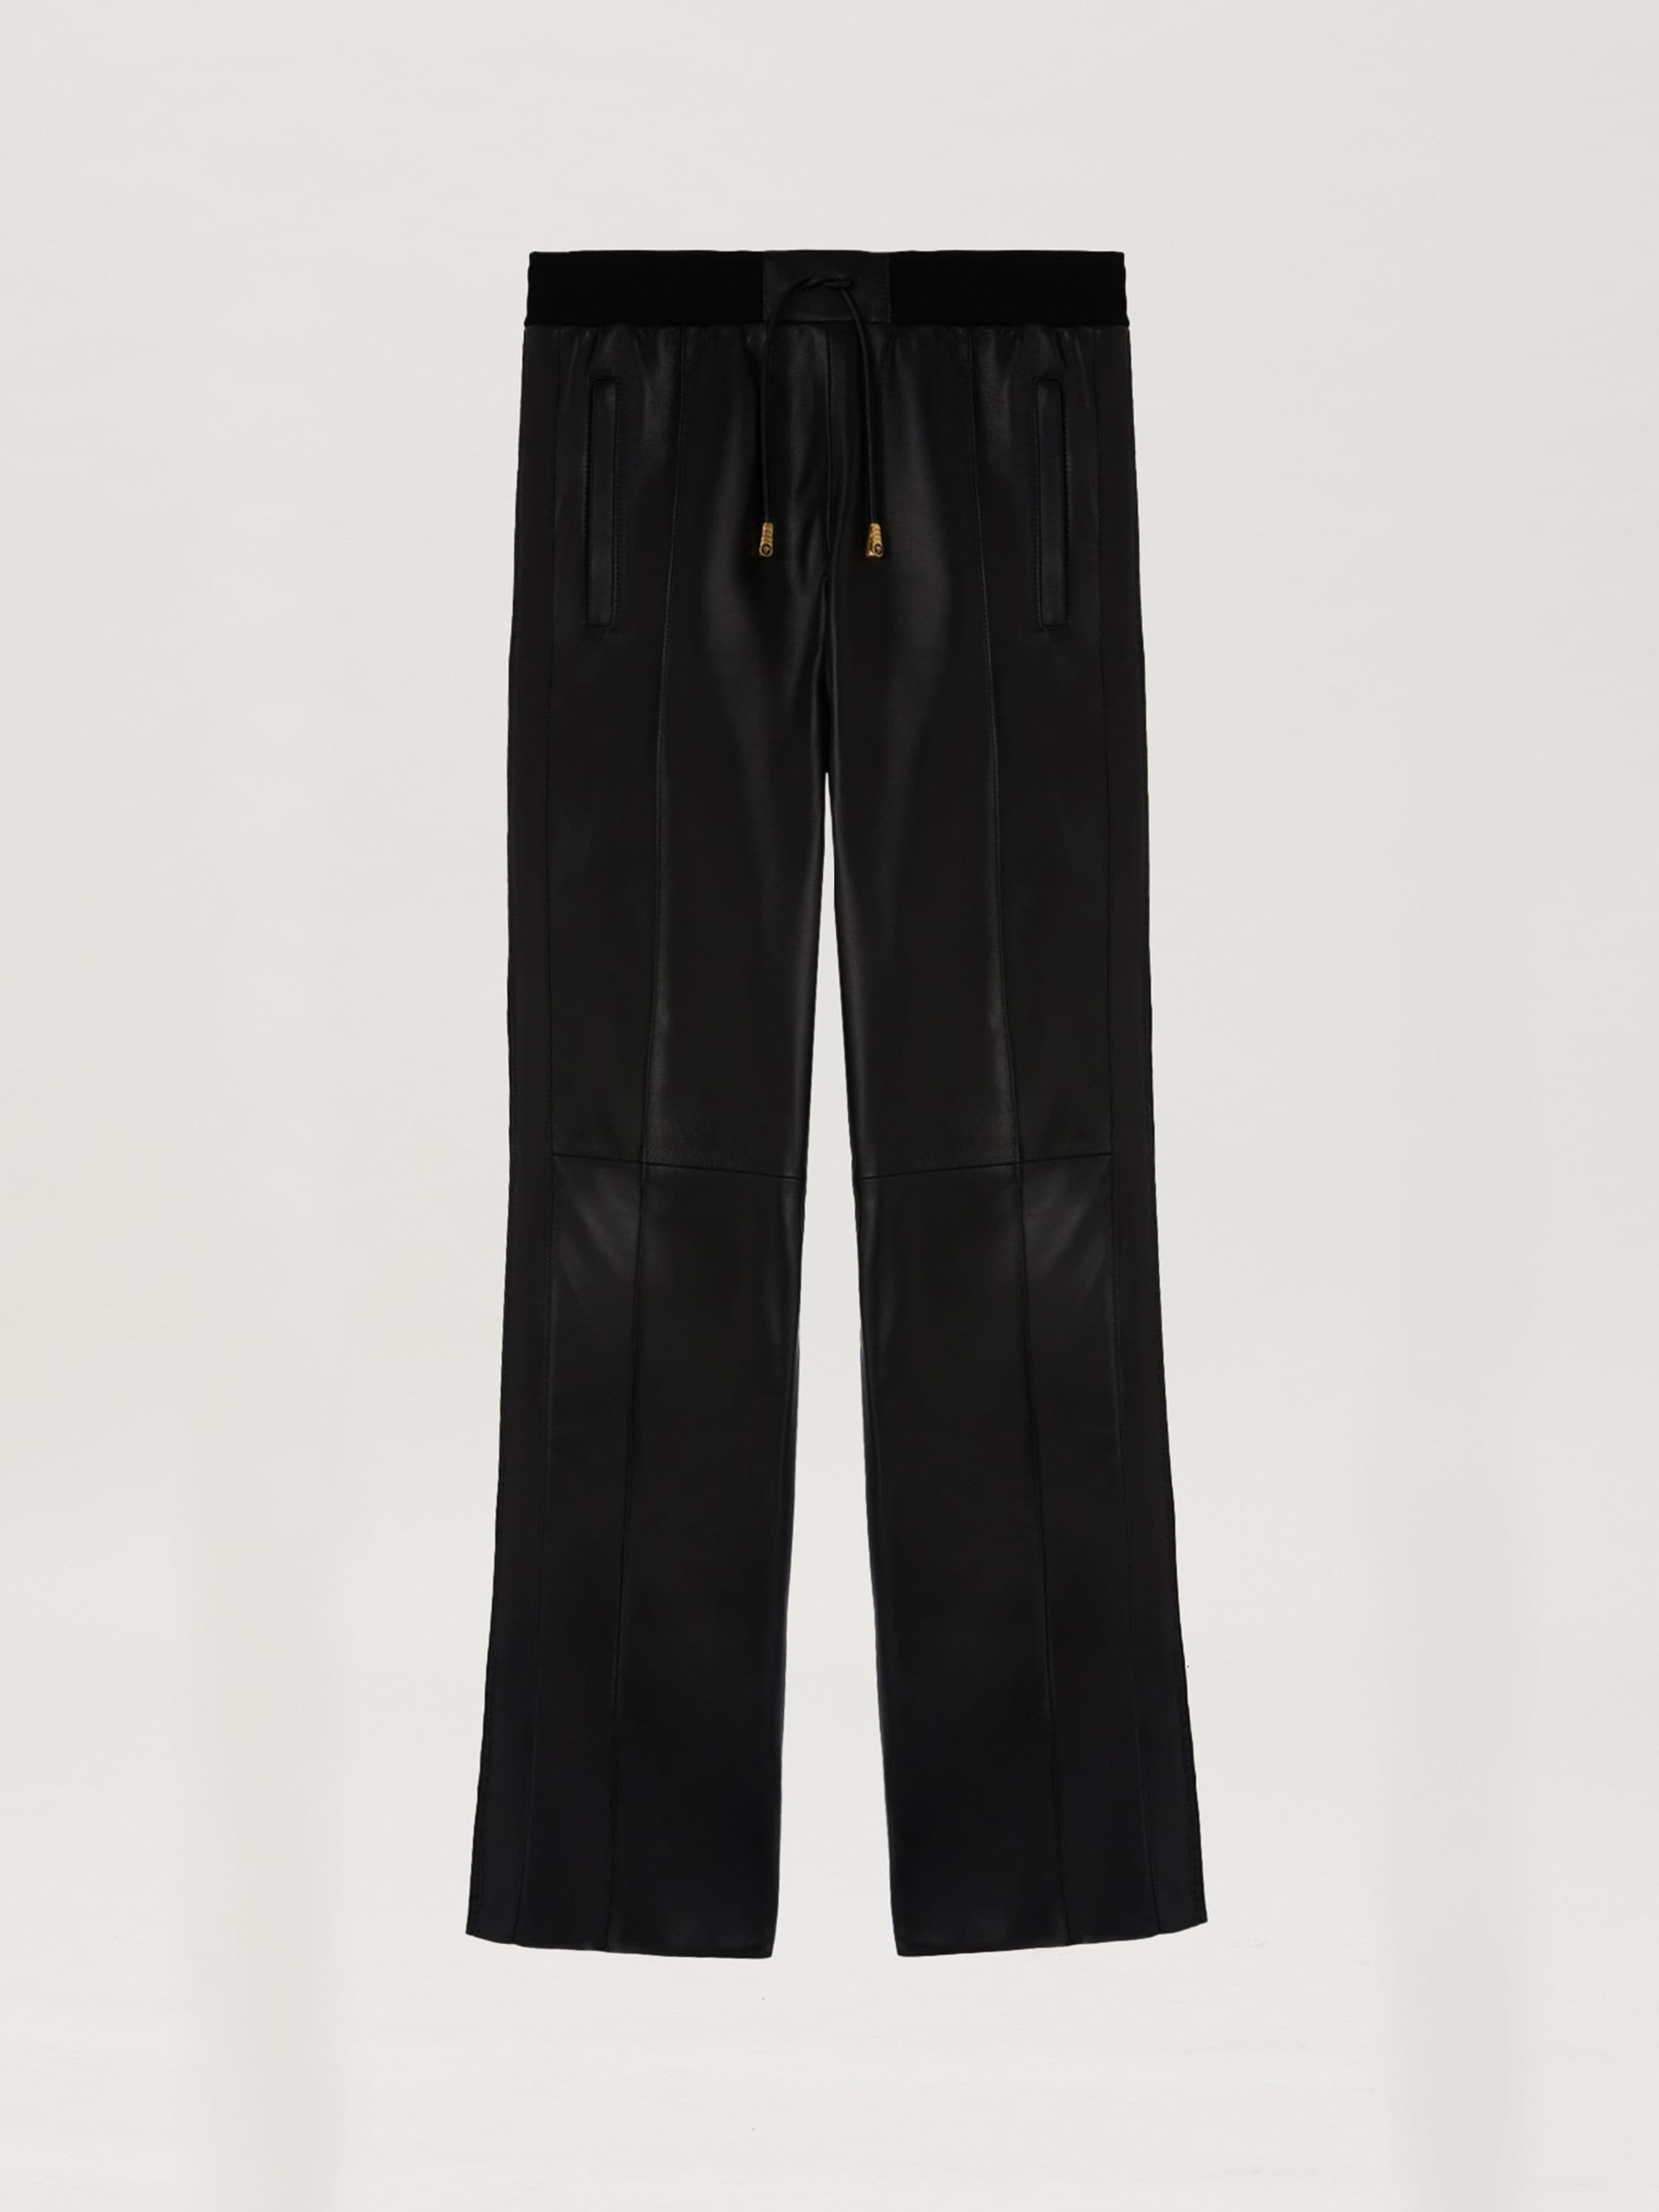 Ultralight Flare Track Pants in black - Palm Angels® Official